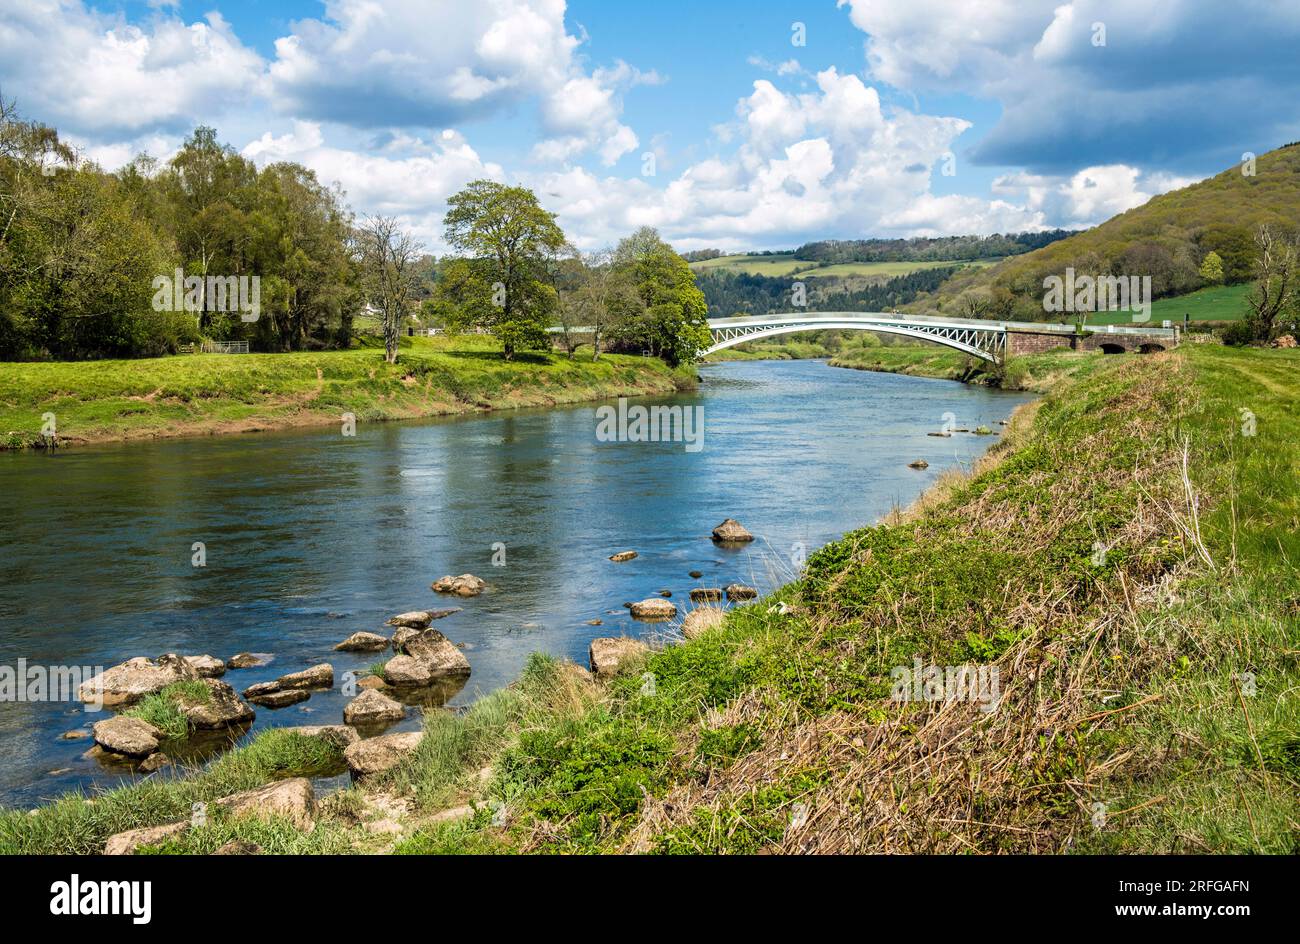 Looking up the River Wye towards Bigsweir Bridge as it crosses the River in the Wye Valley Stock Photo